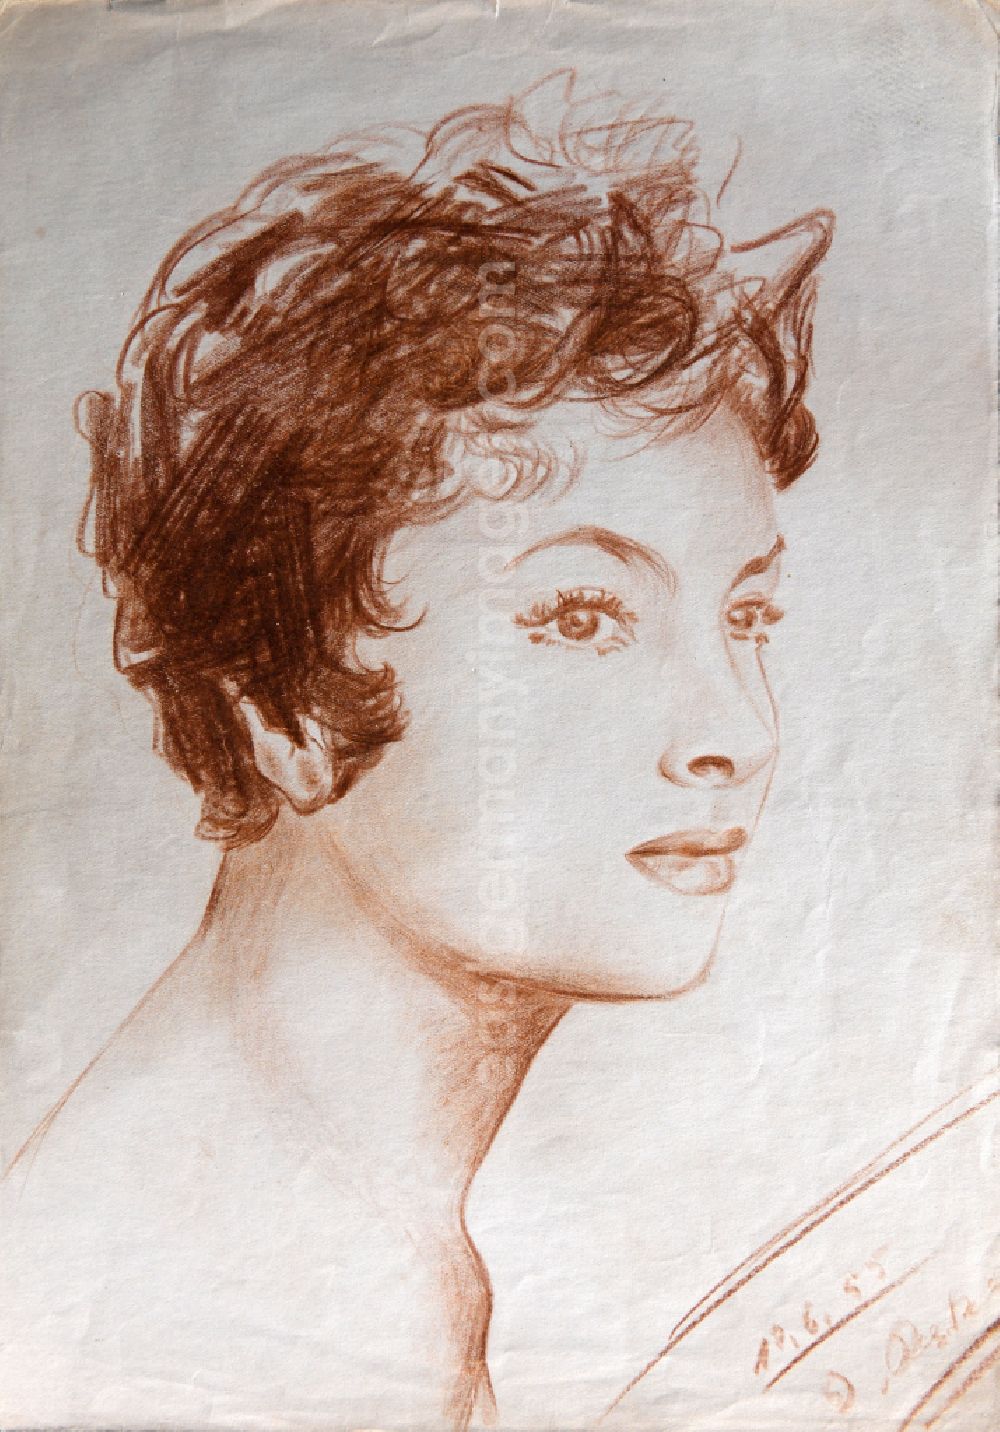 Prerow: VG picture free work: pencil drawing girl portrait by the artist Siegfried Gebser in Prerow in the state Mecklenburg-Western Pomerania on the territory of the former GDR, German Democratic Republic